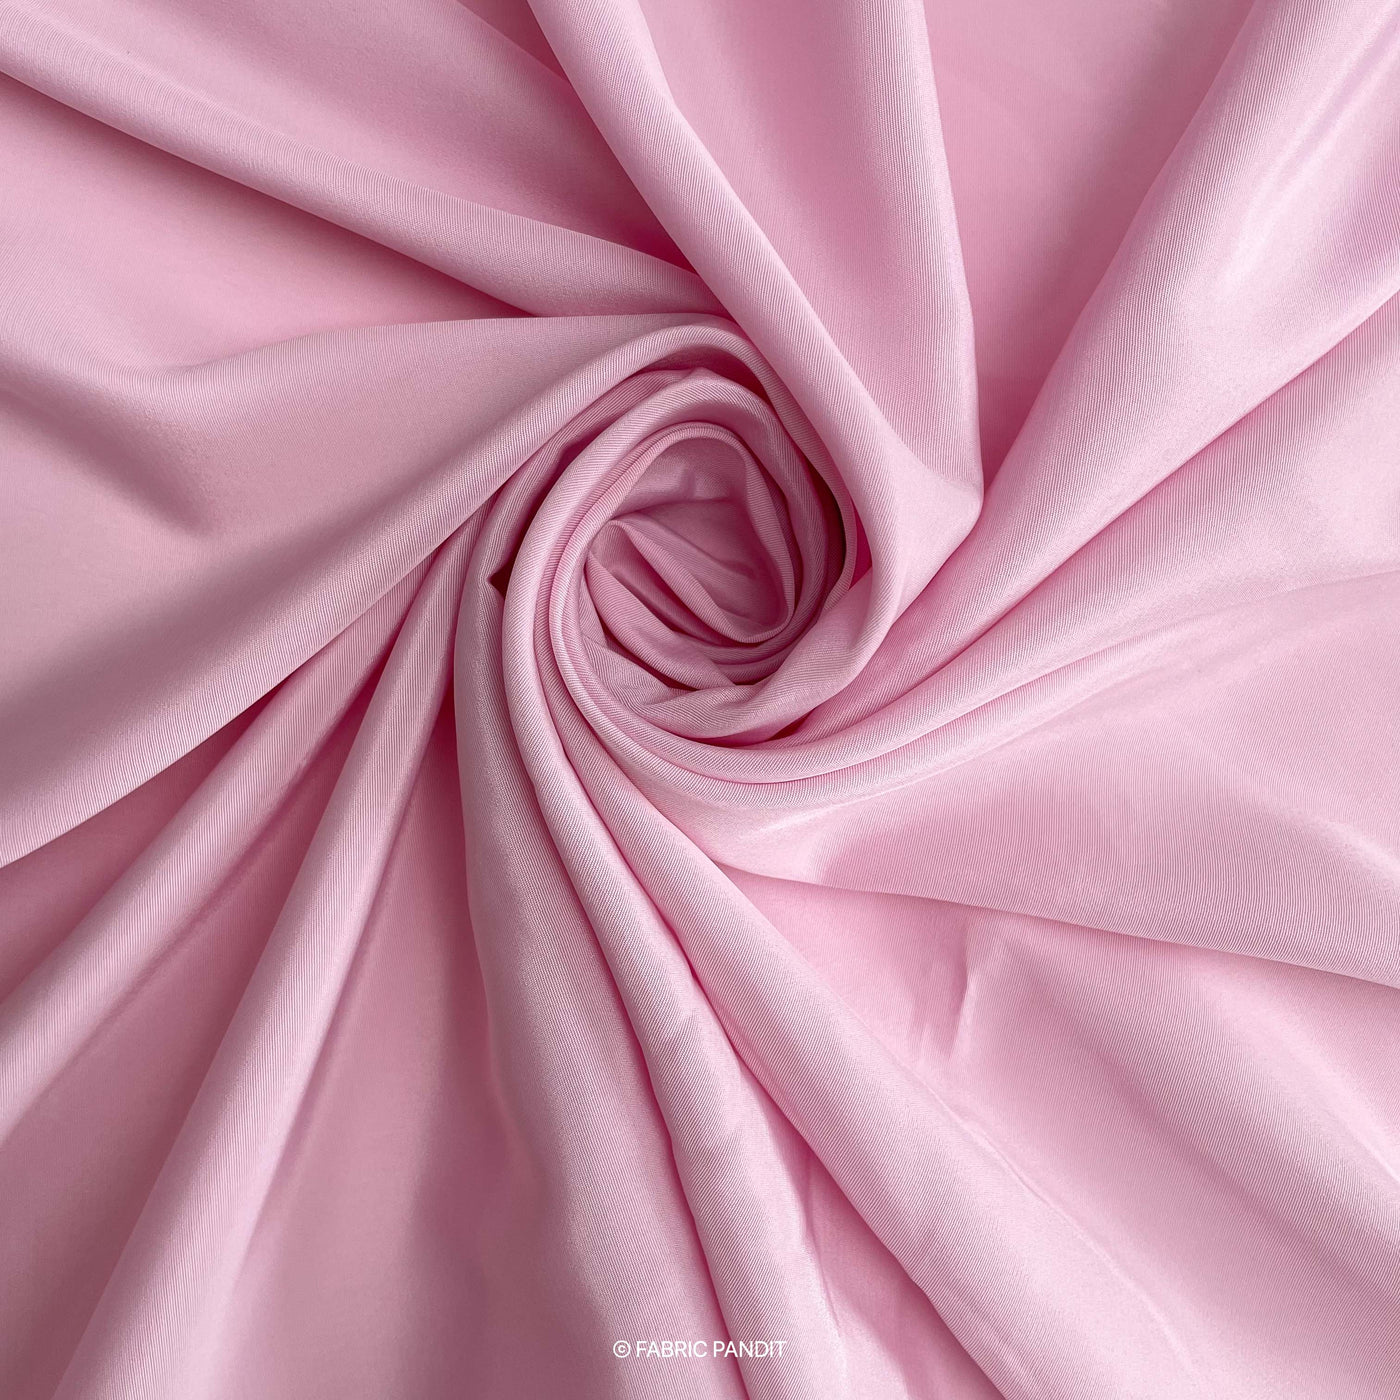 Fabric Pandit Fabric Carnation Pink Premium French Crepe Fabric (Width 44 inches)